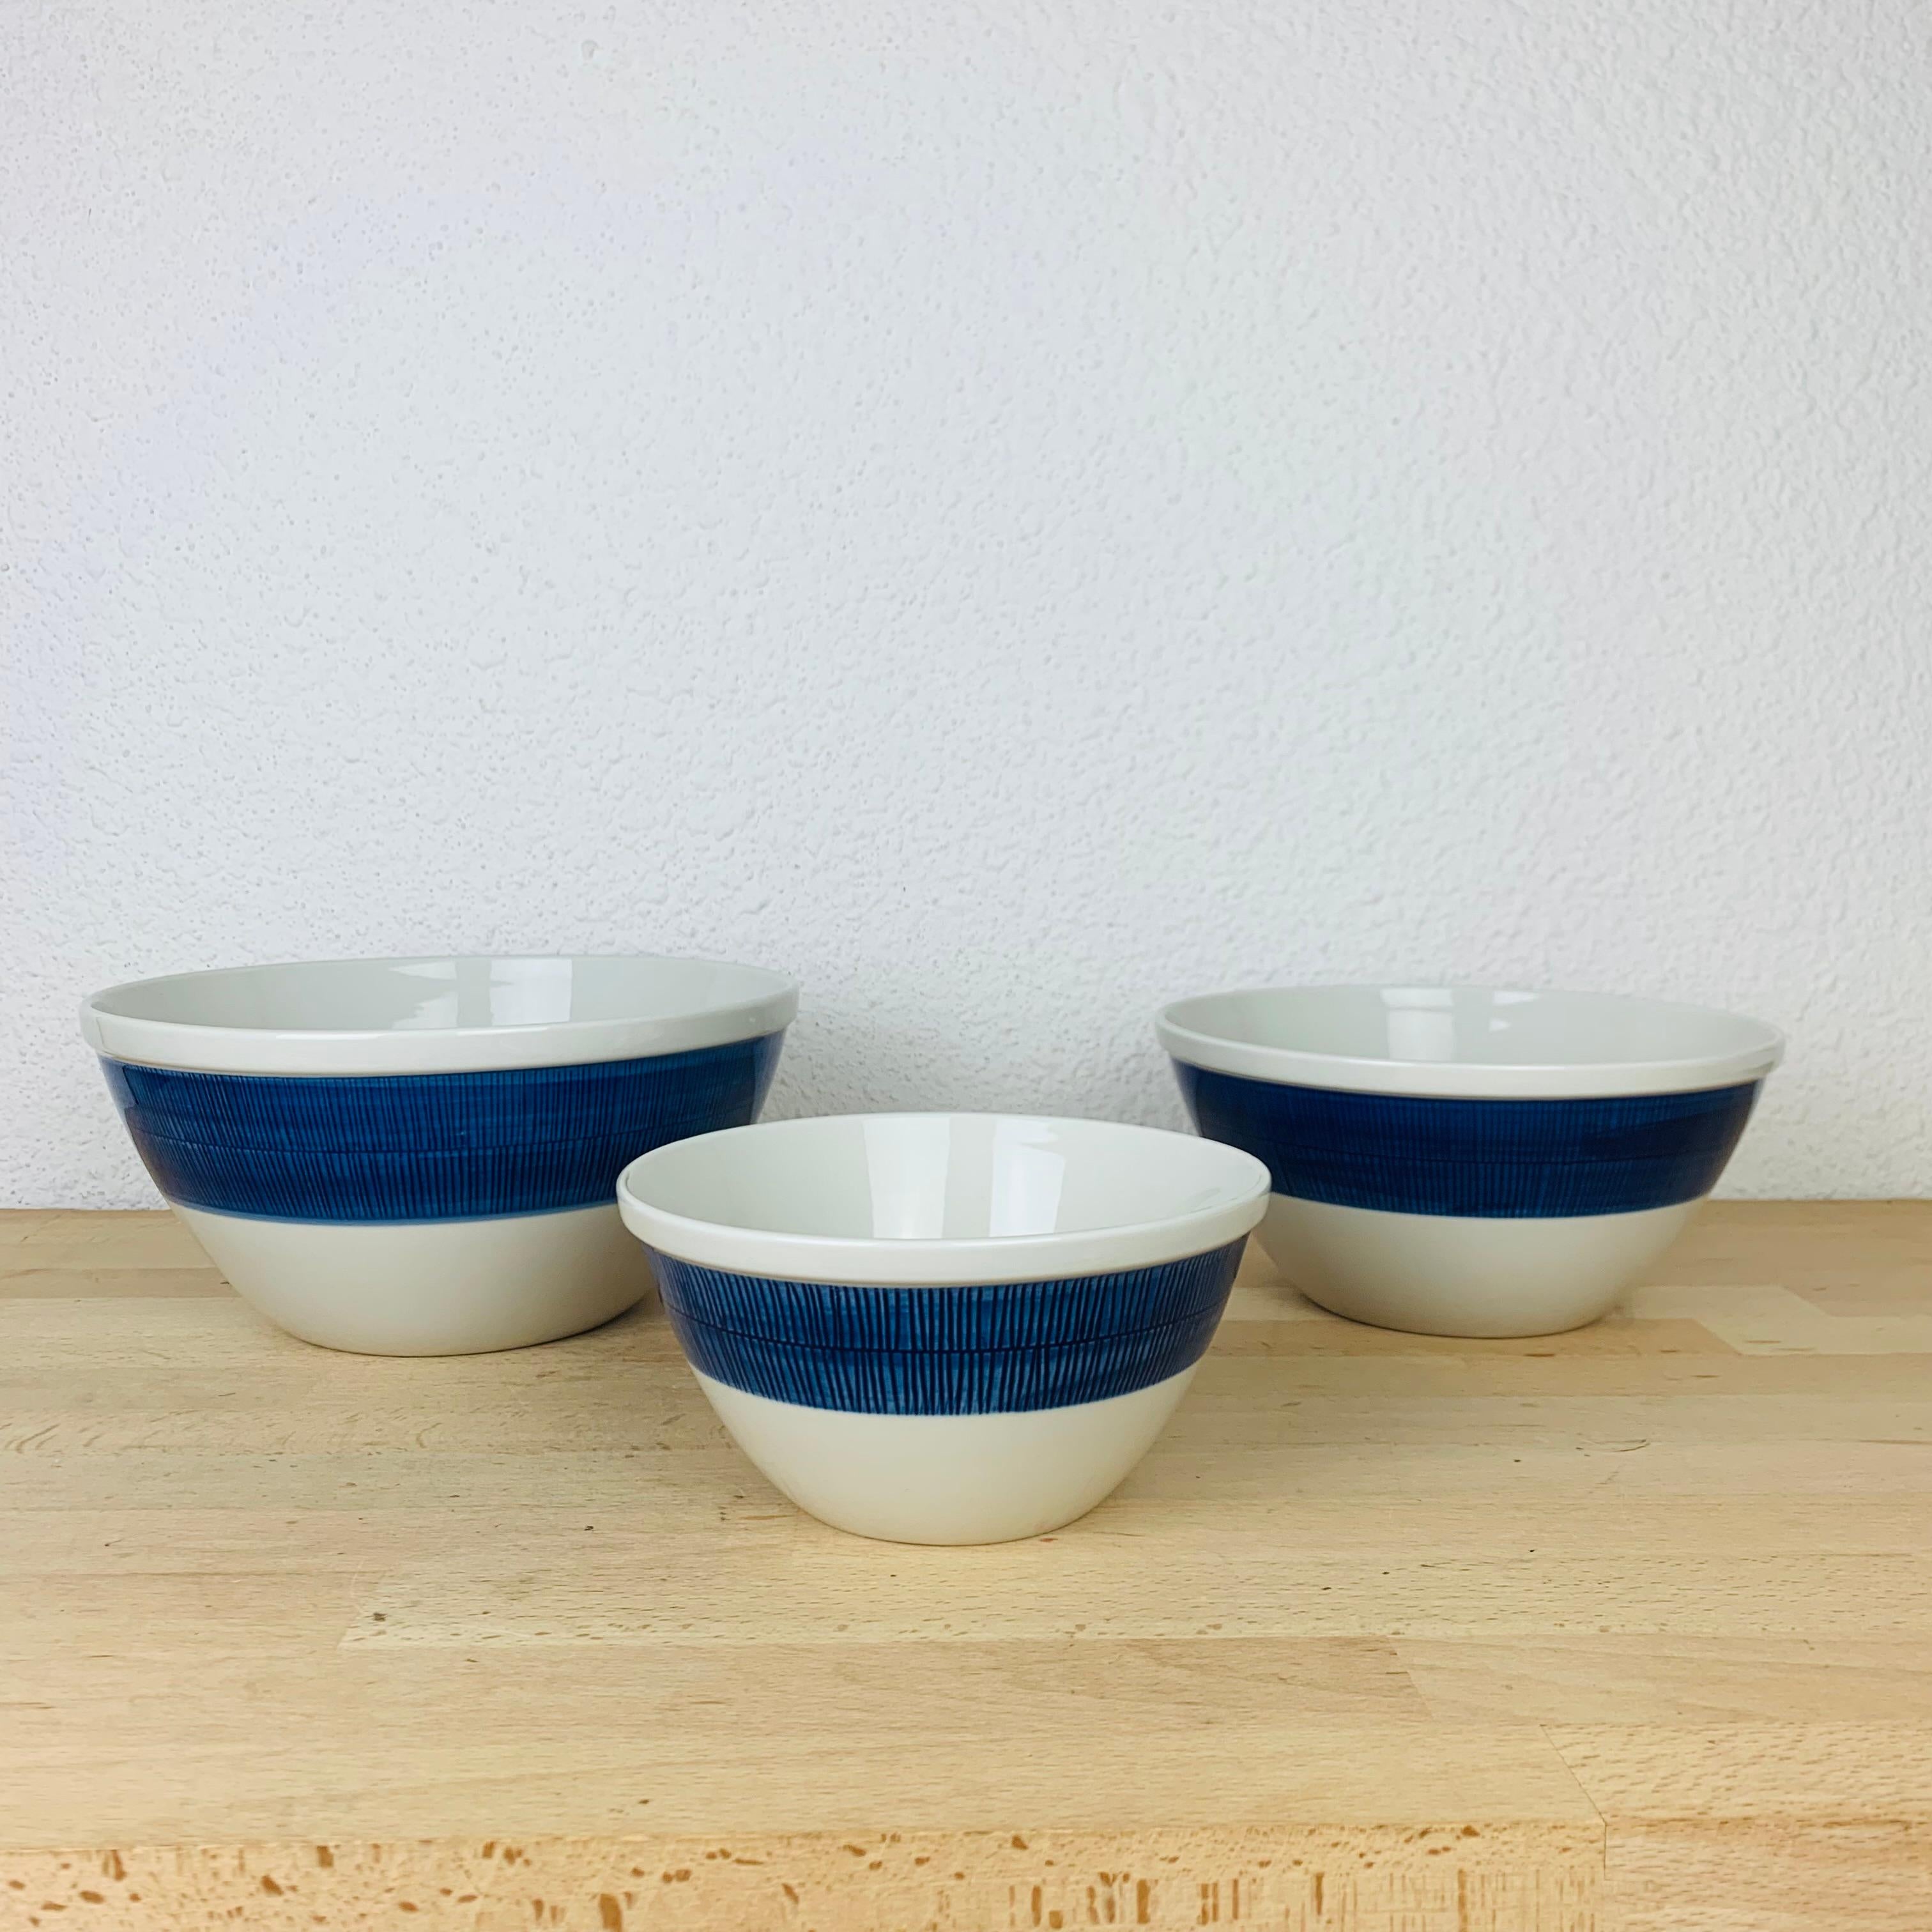 Set of three serving bowls by Hertha Bengtson for Rörstrand Sweden, manufactured in the 1960's.

Slight wear due to its age and use, no chip, no crack. 

Measurements : height 8, 5 cm / 10 cm / 11 cm, diameter 16, 5 cm / 21 cm / 23 cm.